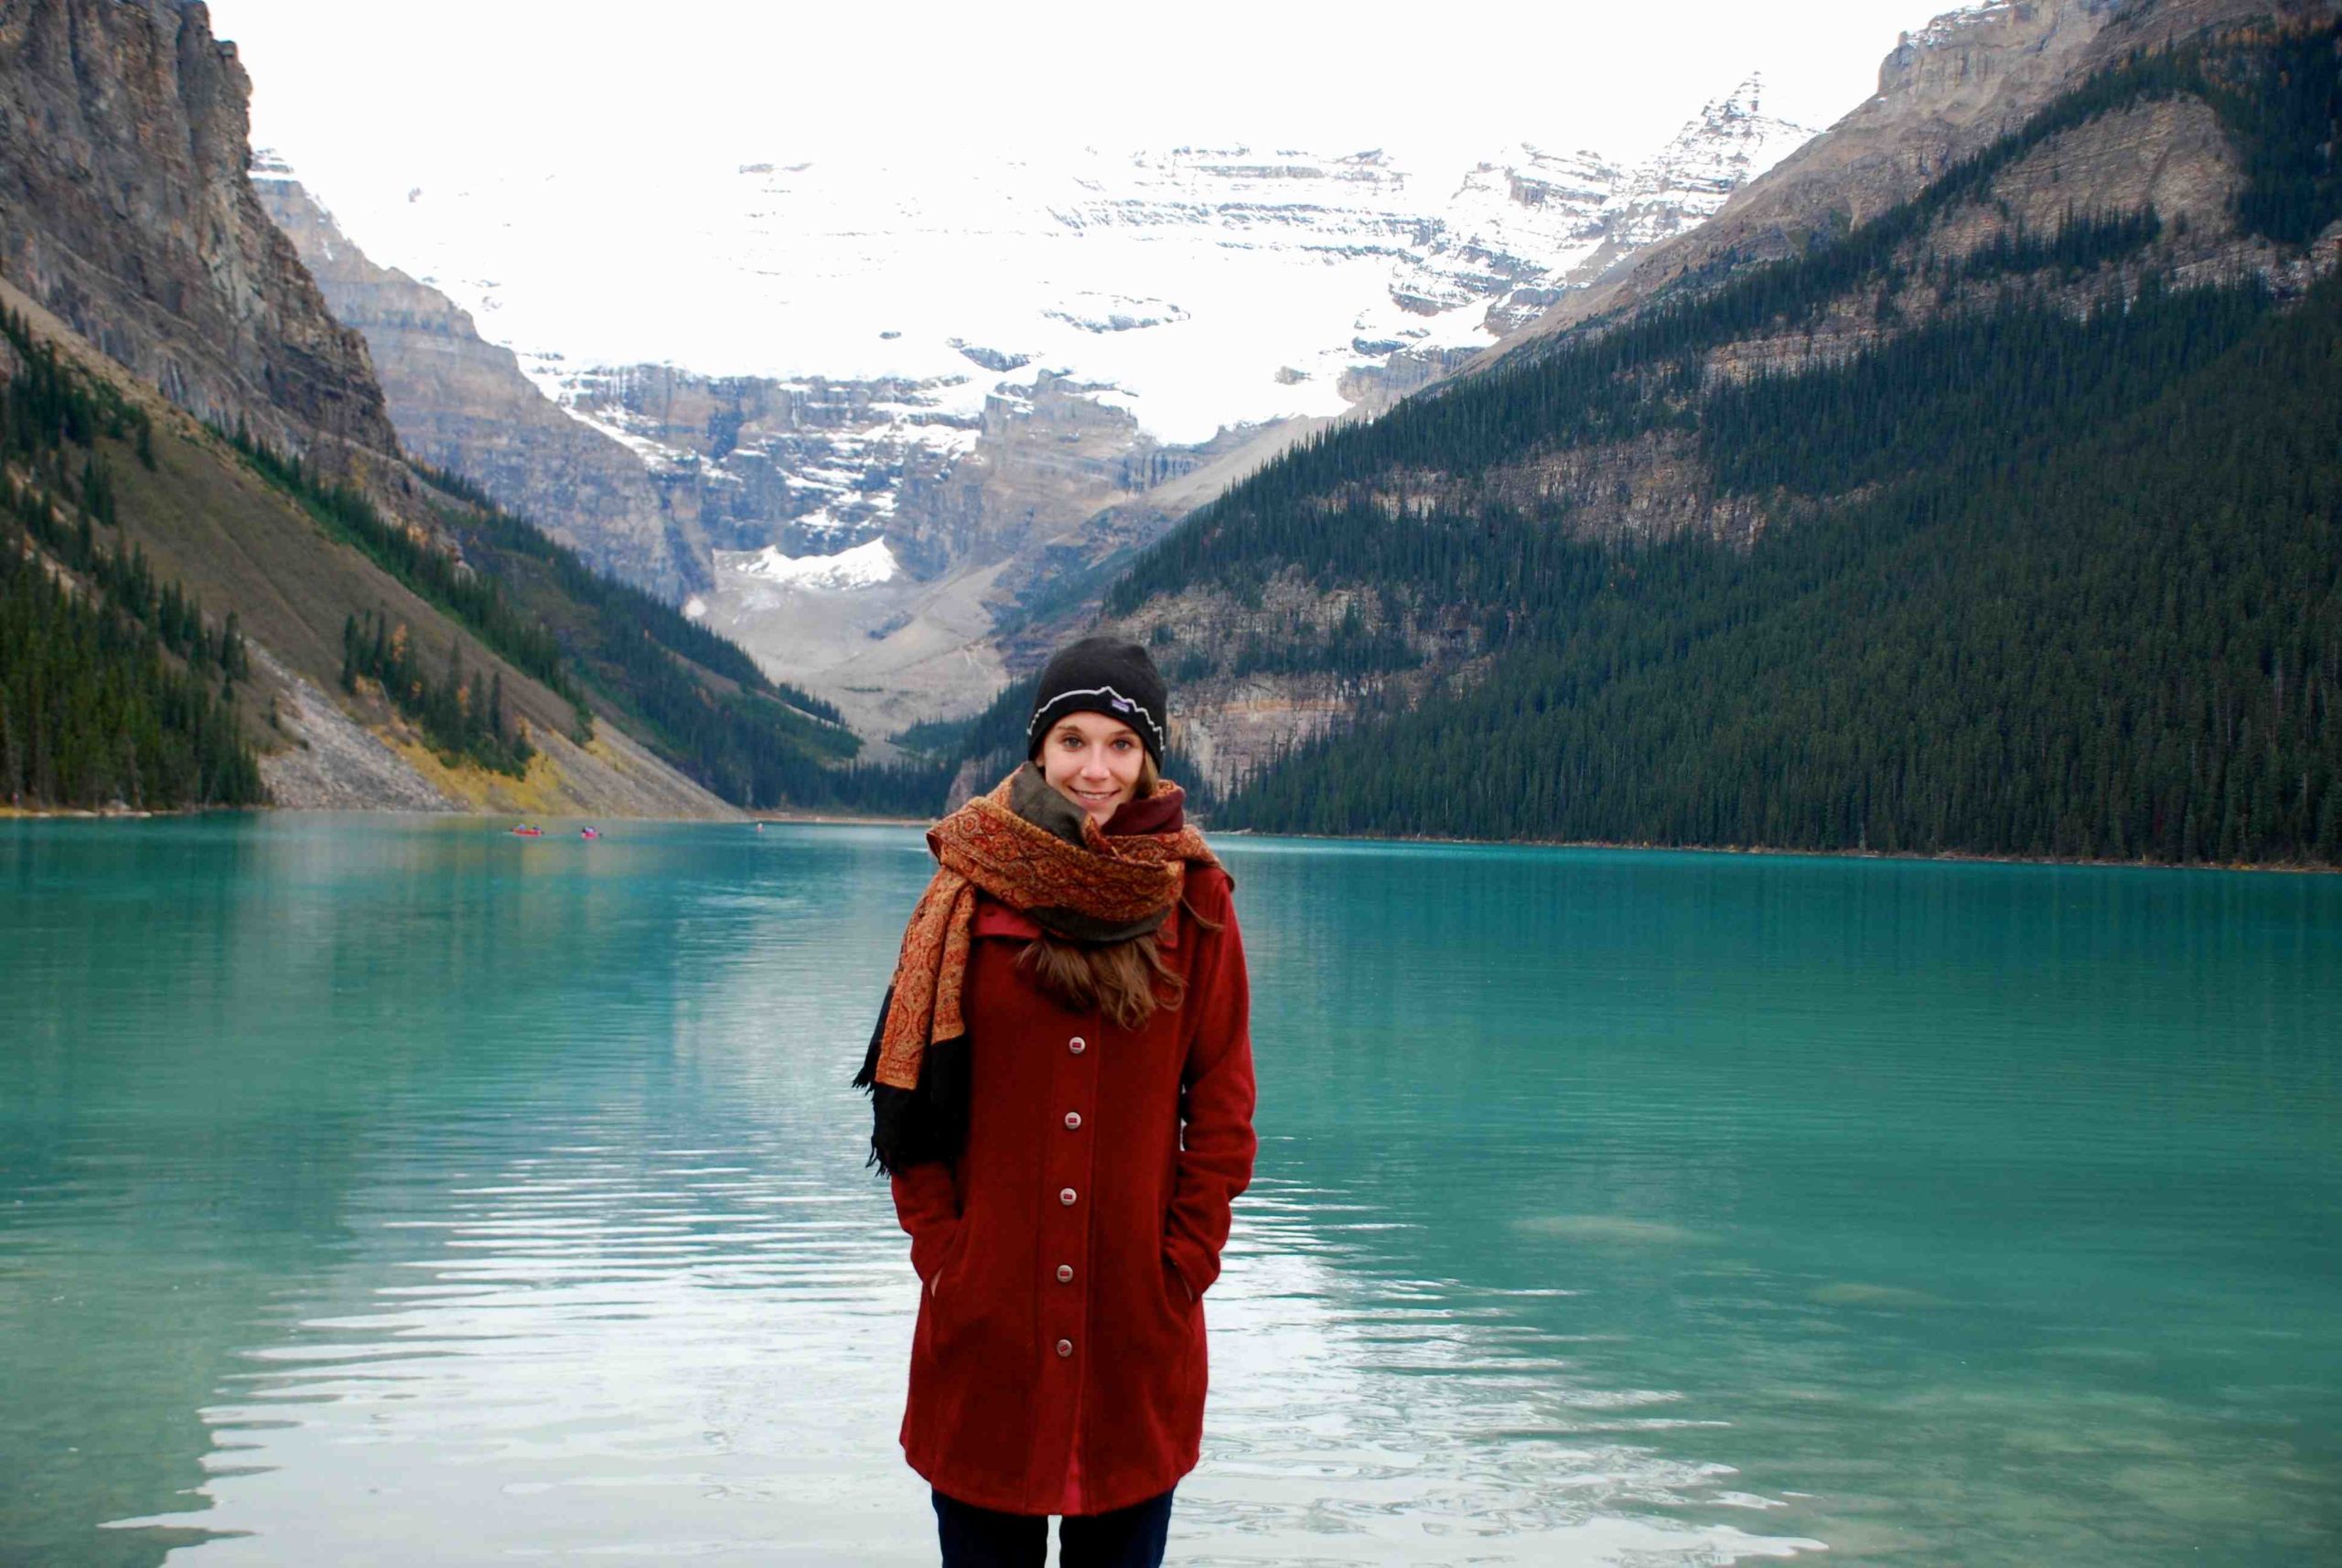 The author, bundled in her winter coat, scarf and hat, at Lake Louise. IRT photo by Belinda